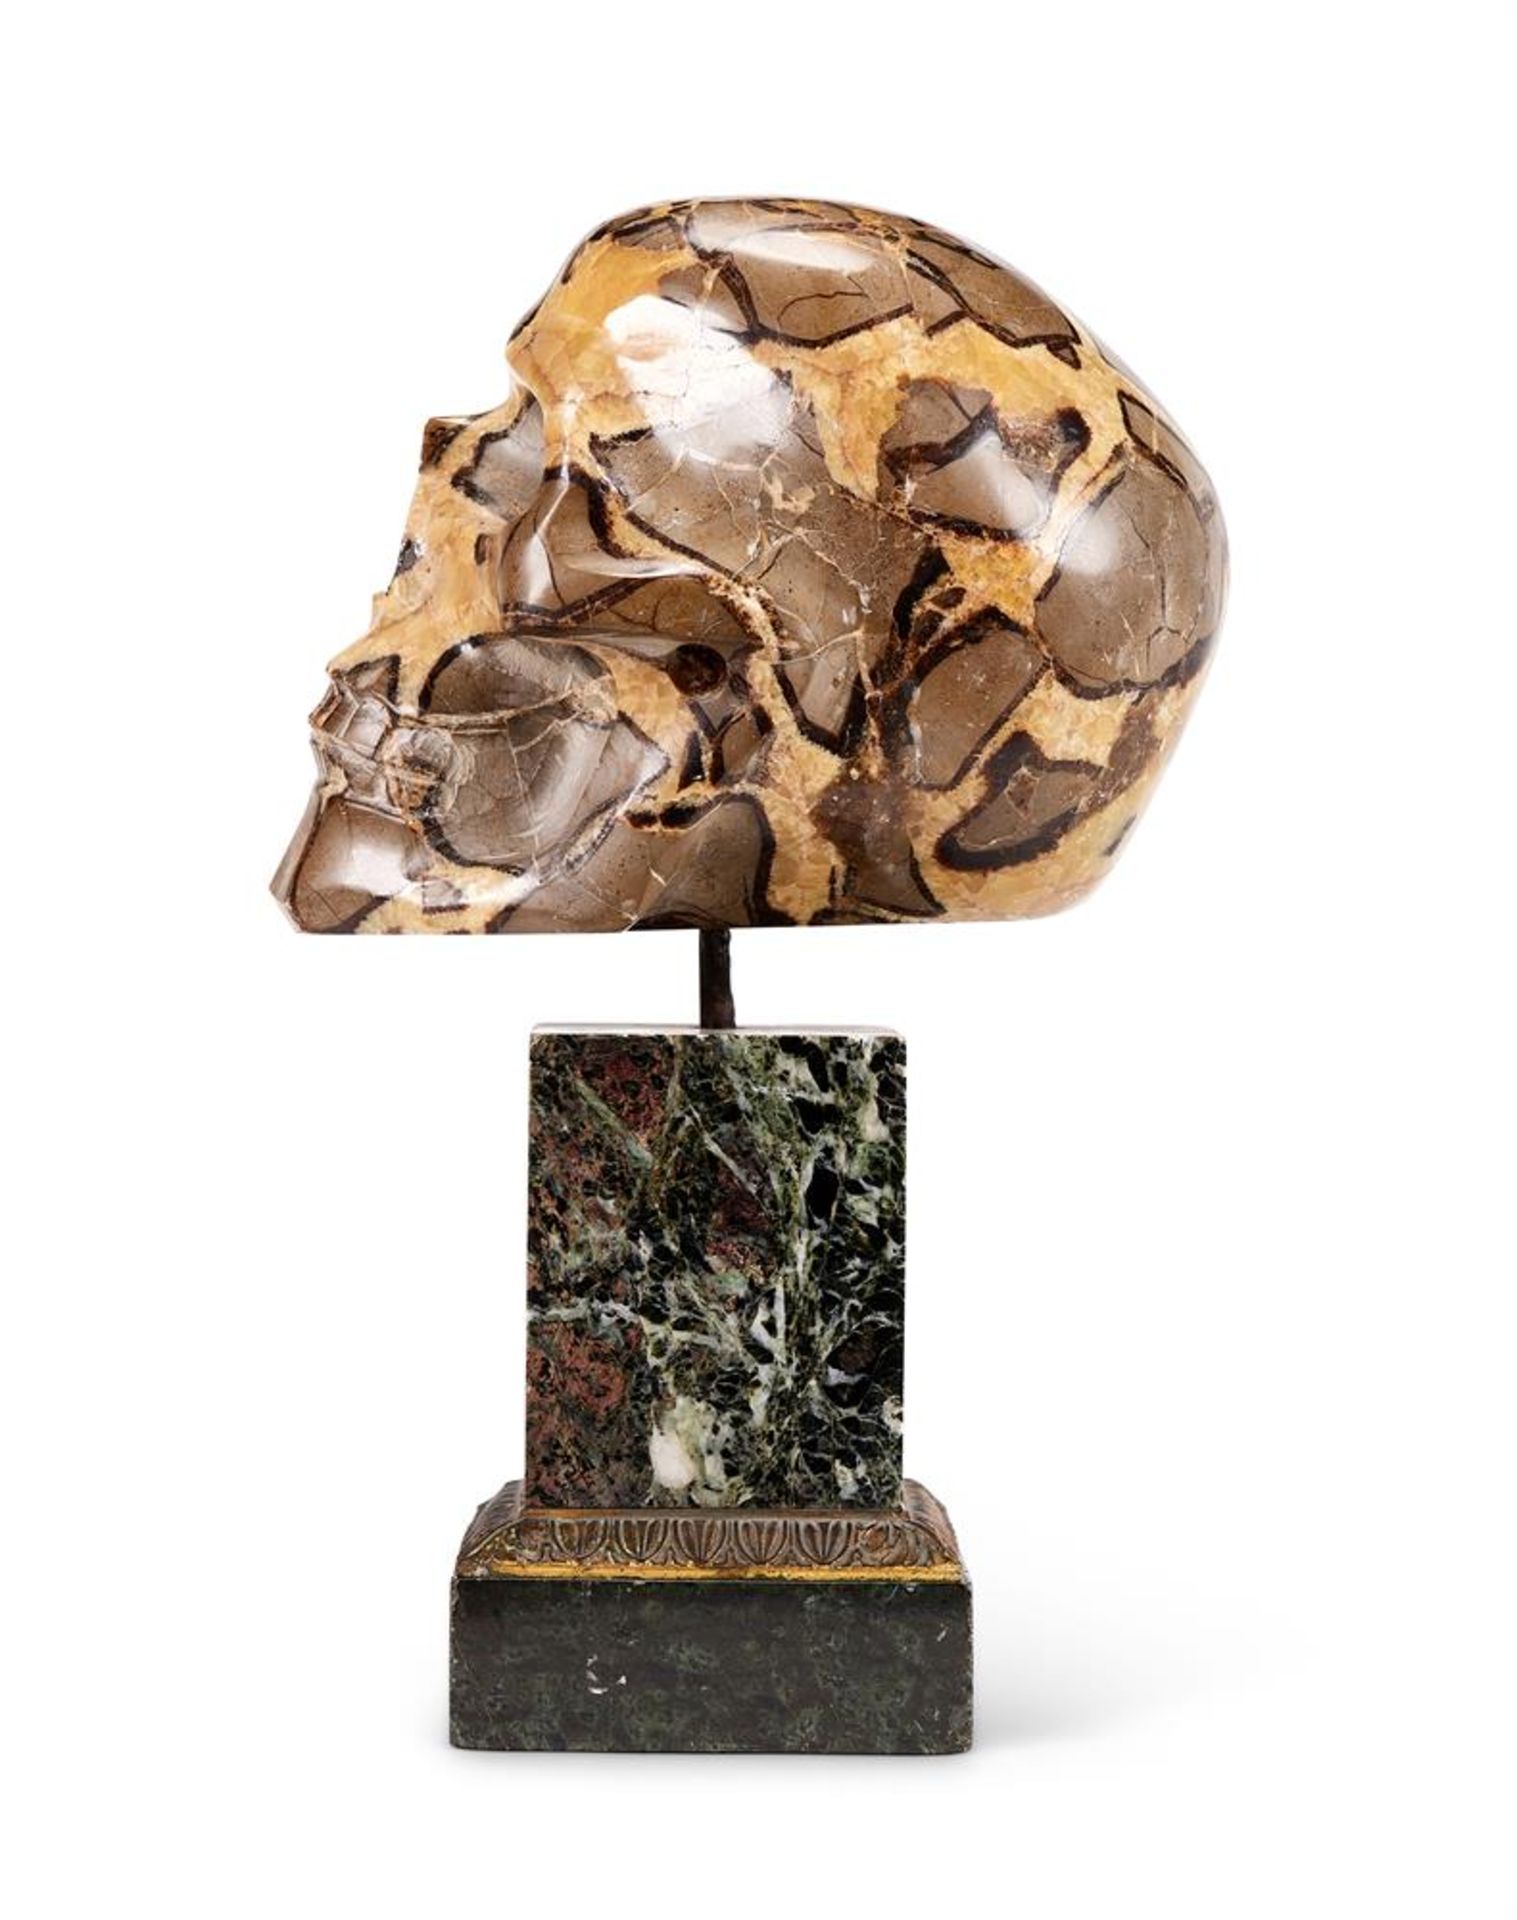 A MADAGASCAN CARVED SEPTARIAN NODULE SKULL 20TH CENTURY - Image 2 of 2